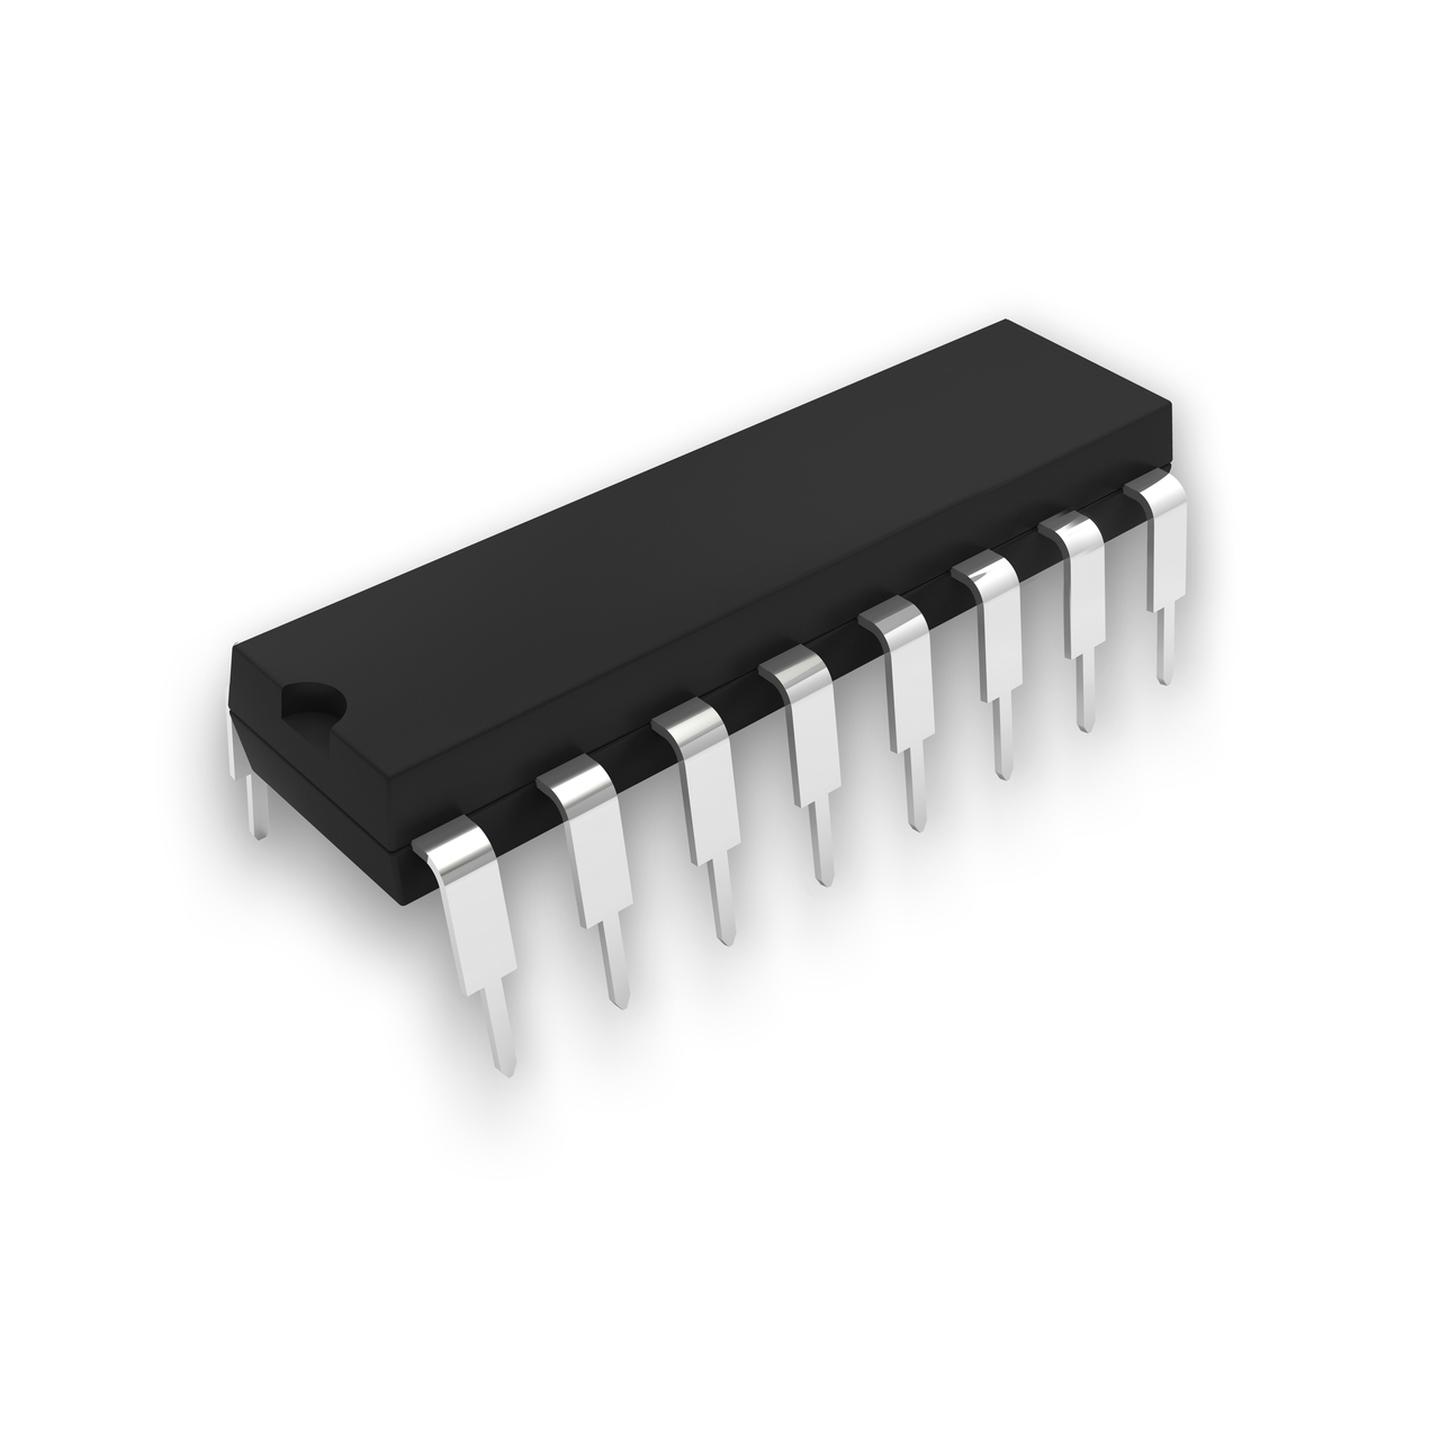 4022 Divide by 8 Counter/Divider CMOS IC